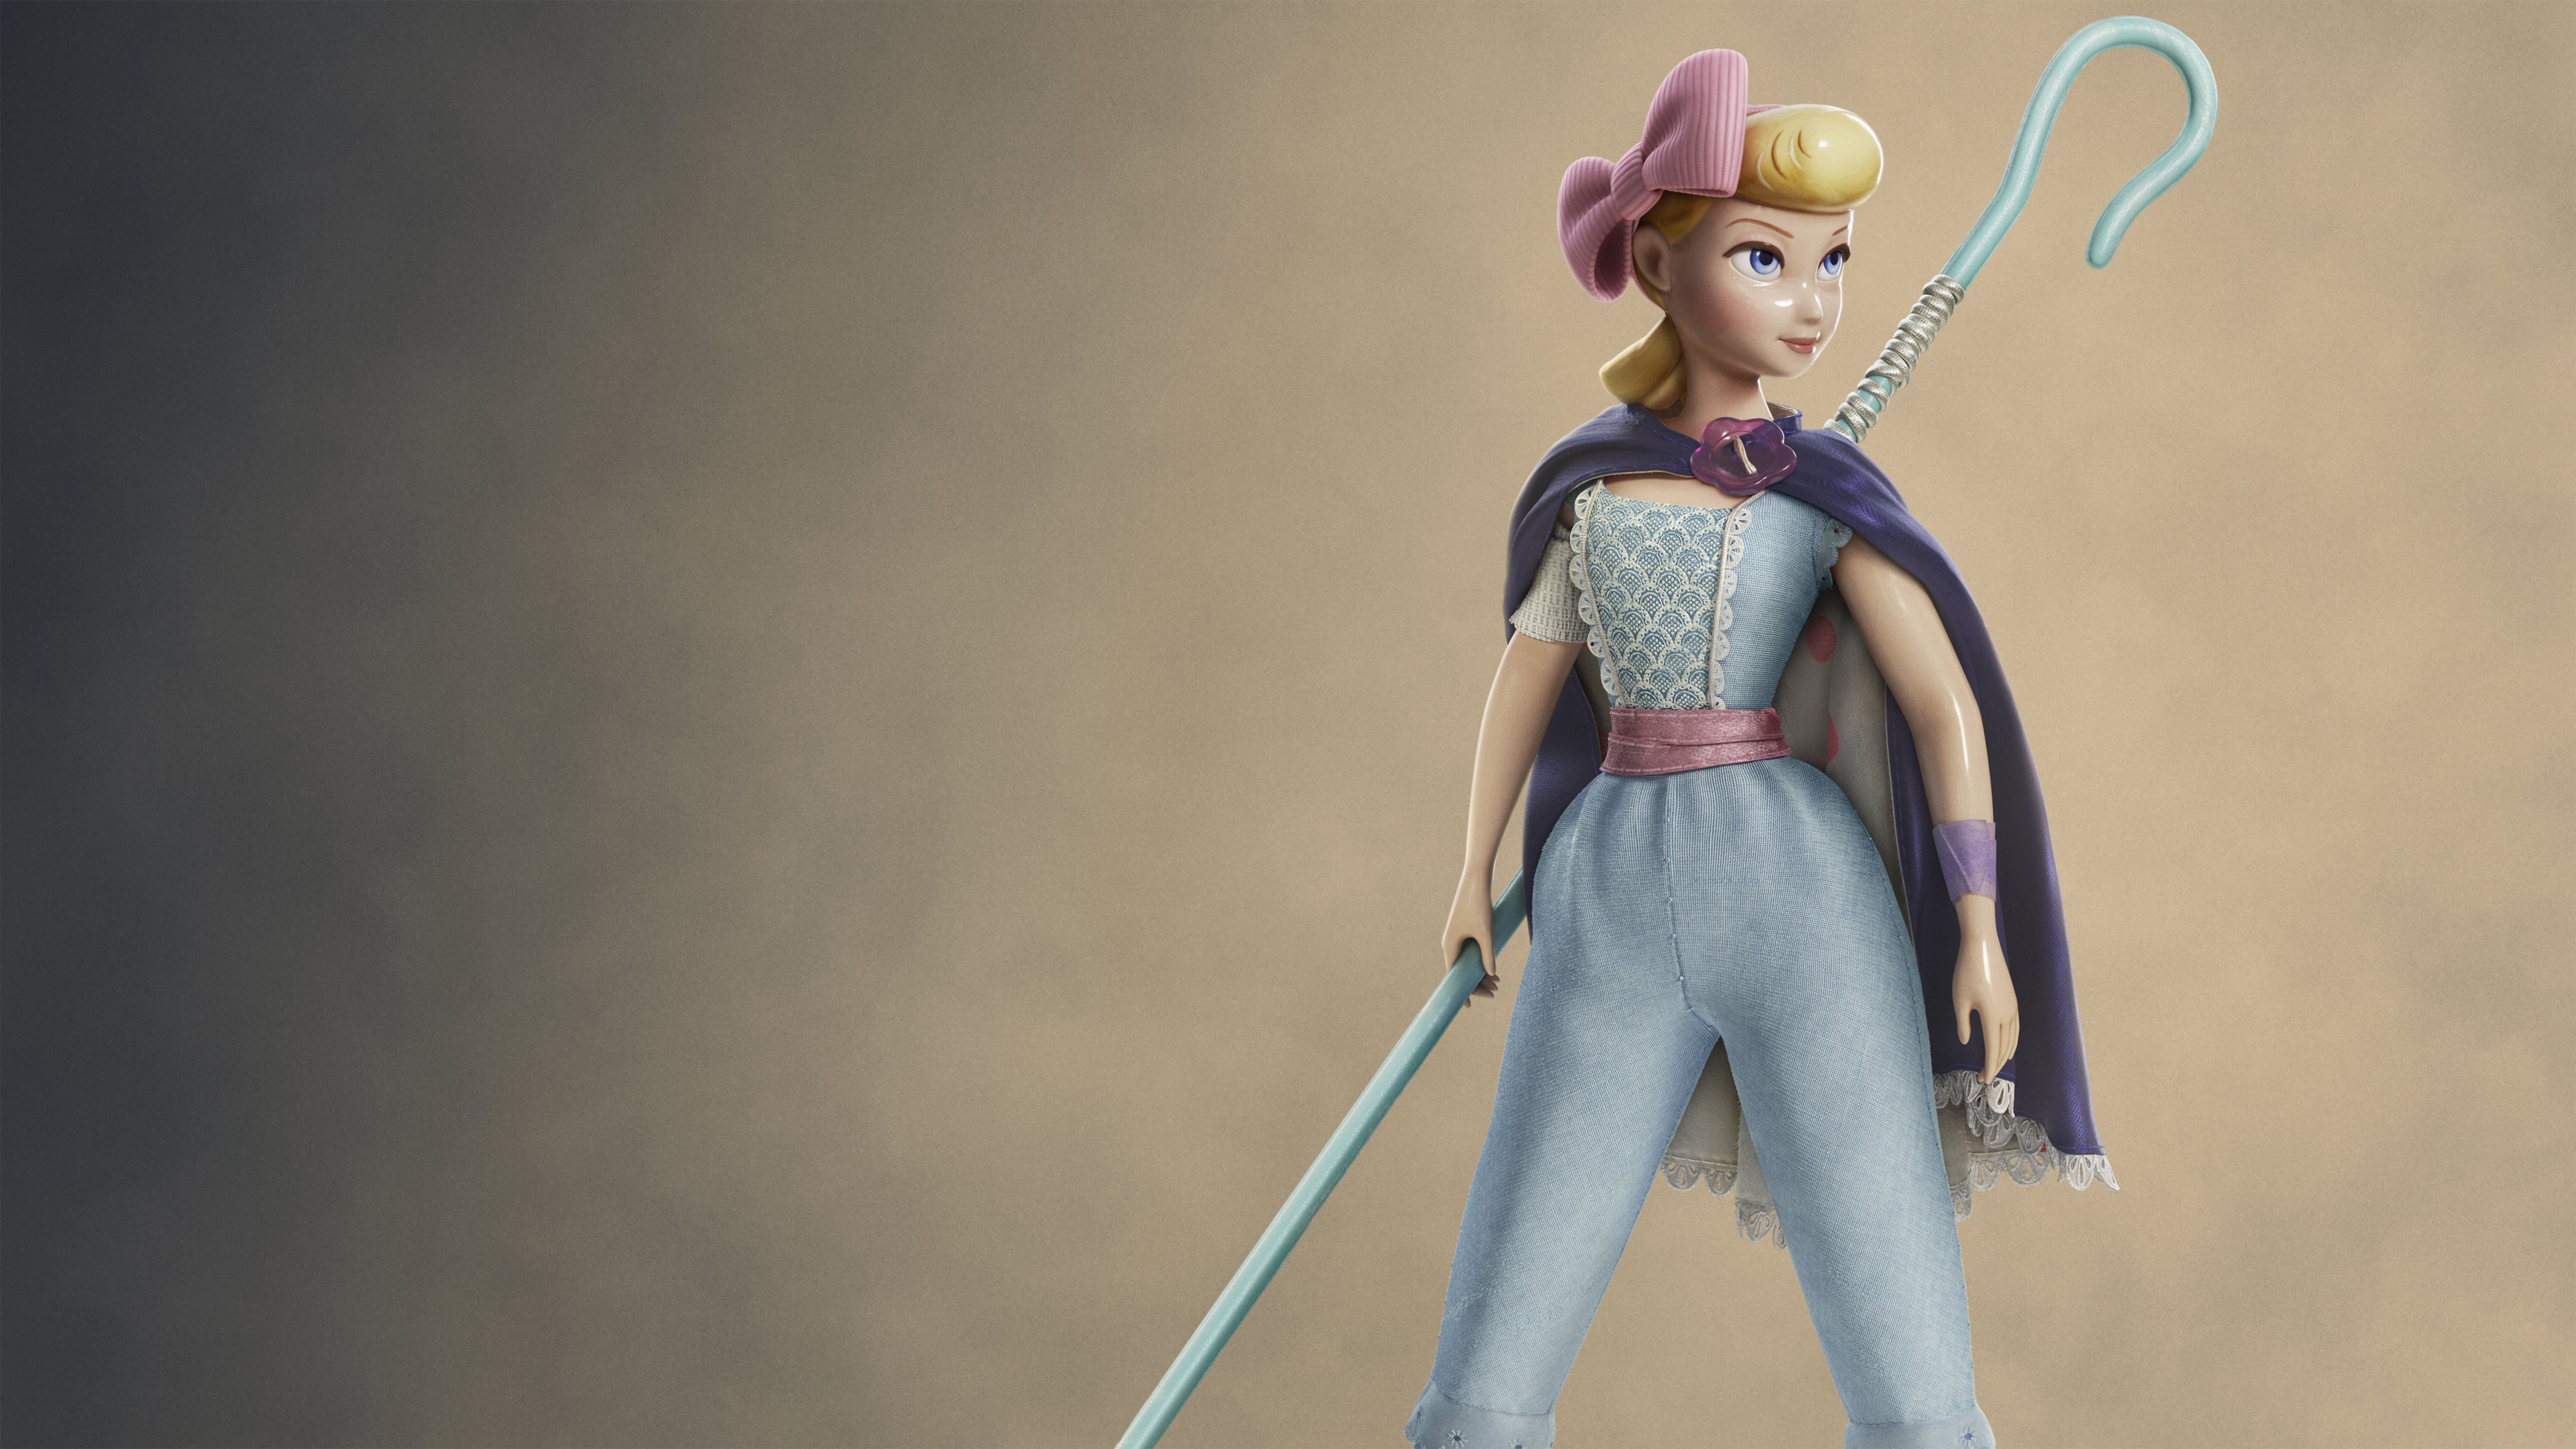 Bo Peep Toy Story 4 Wallpaper, HD Movies 4K Wallpaper, Image, Photo and Background